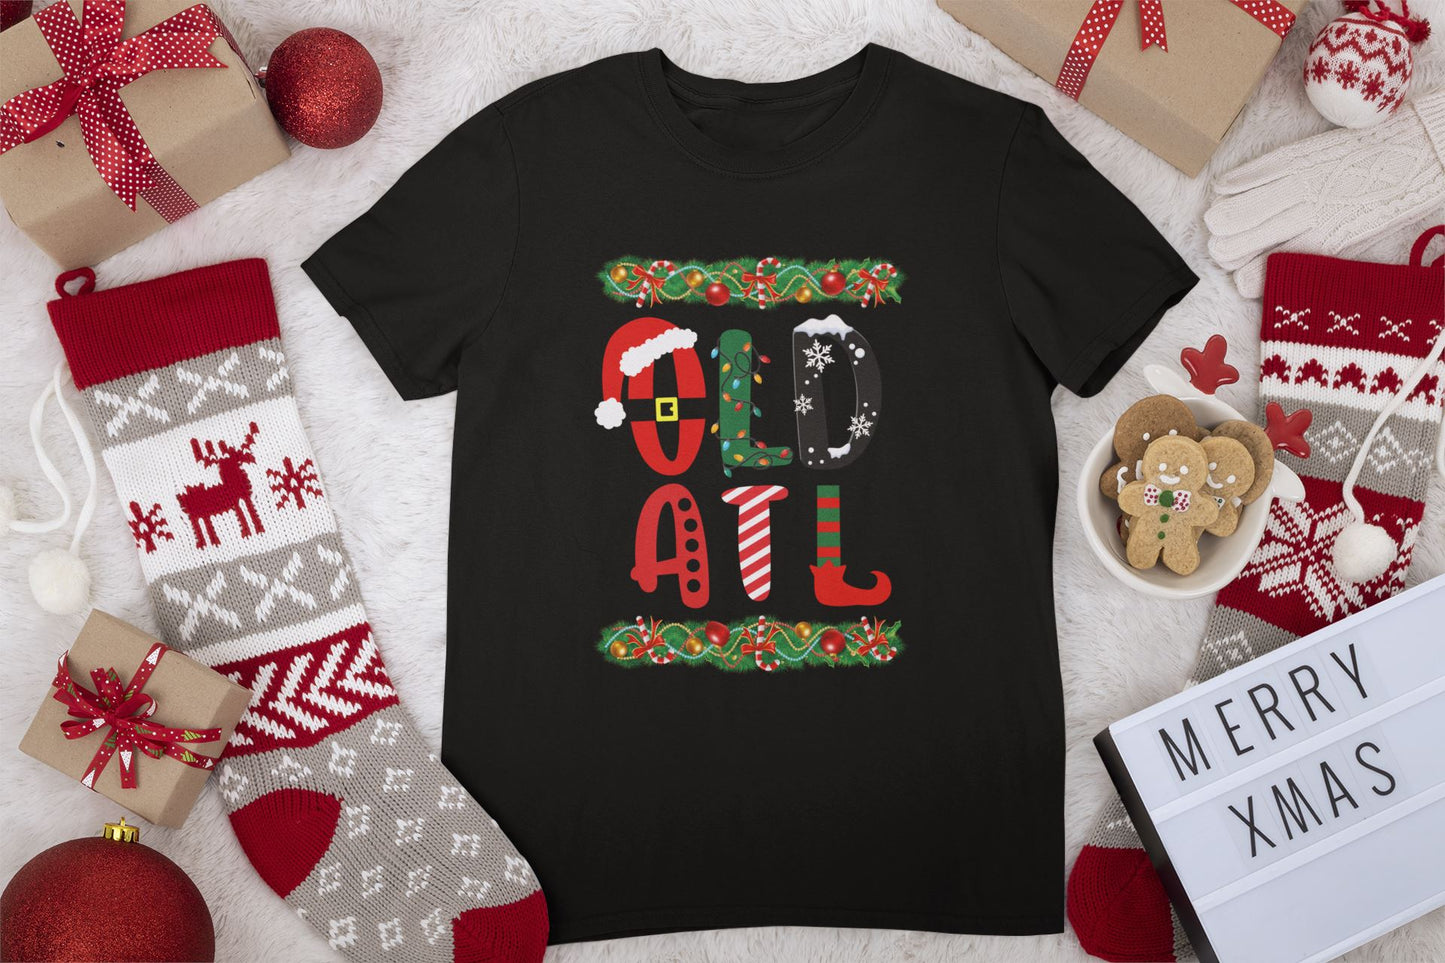 OLD ATL Holiday T-Shirt (Ugly Christmas Shirt) B1ack By Design LLC Double Garland (Top/Bottom) S 